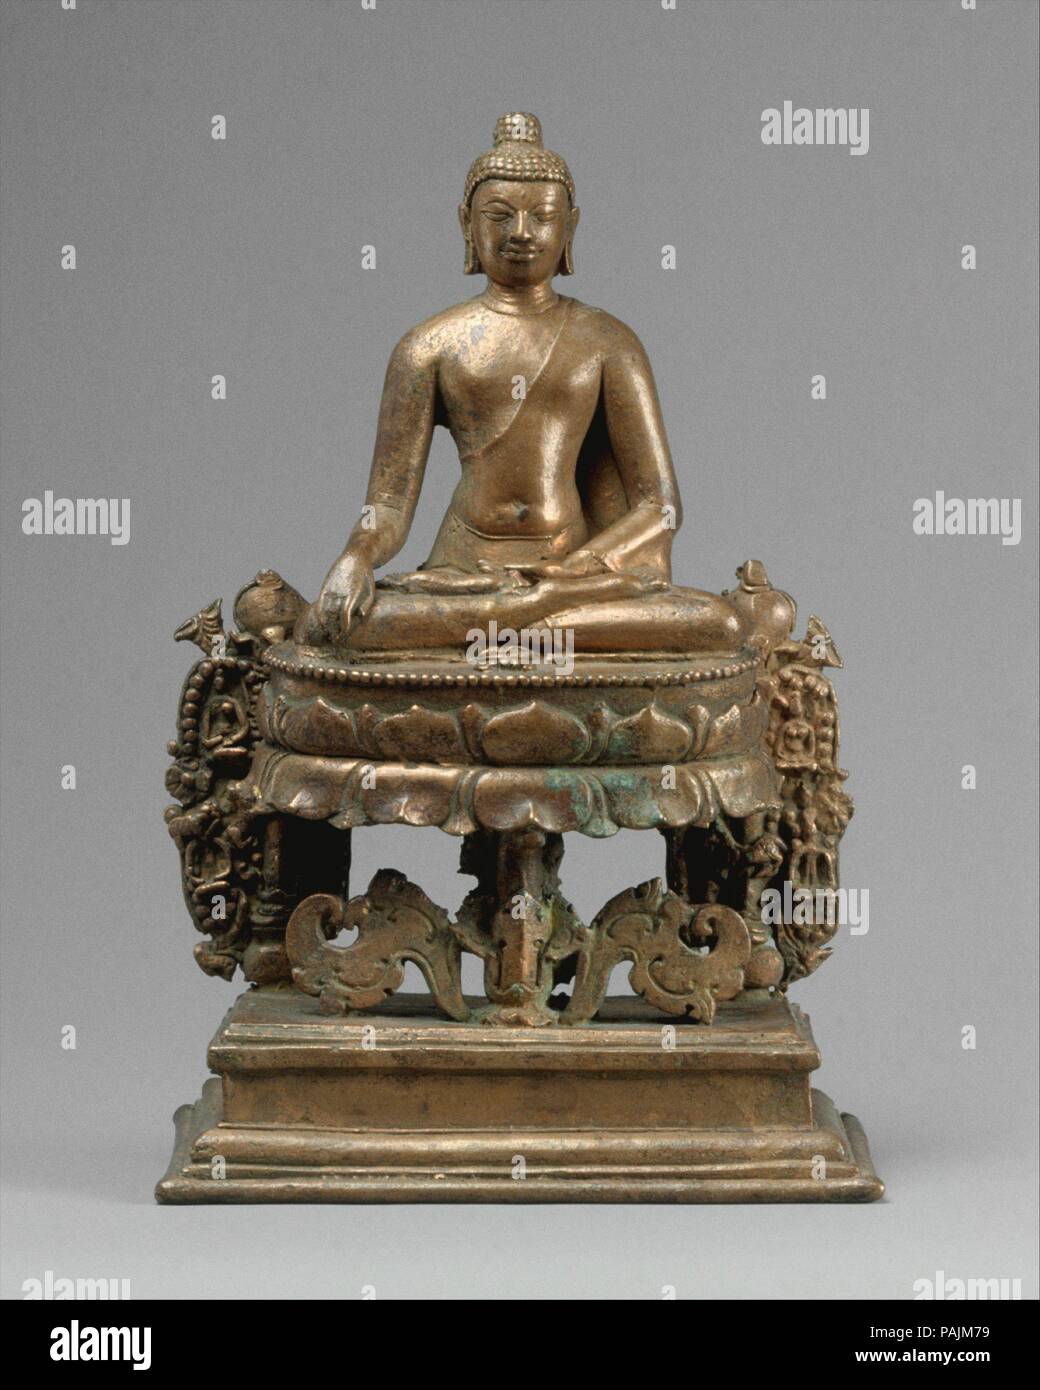 Lotus-Enthroned Buddha Akshobhya, the Transcendent Buddha. Culture: Bangladesh (probably Comilla District). Dimensions: H. 7 15/16 in. (20.2 cm); W. 5 1/4 in. (13.4 cm). Date: 8th-early 9th century.  Akshobhya is one of the five Transcendent Buddhas of Esoteric Buddhism. Elephants are his traditional mount. Museum: Metropolitan Museum of Art, New York, USA. Stock Photo